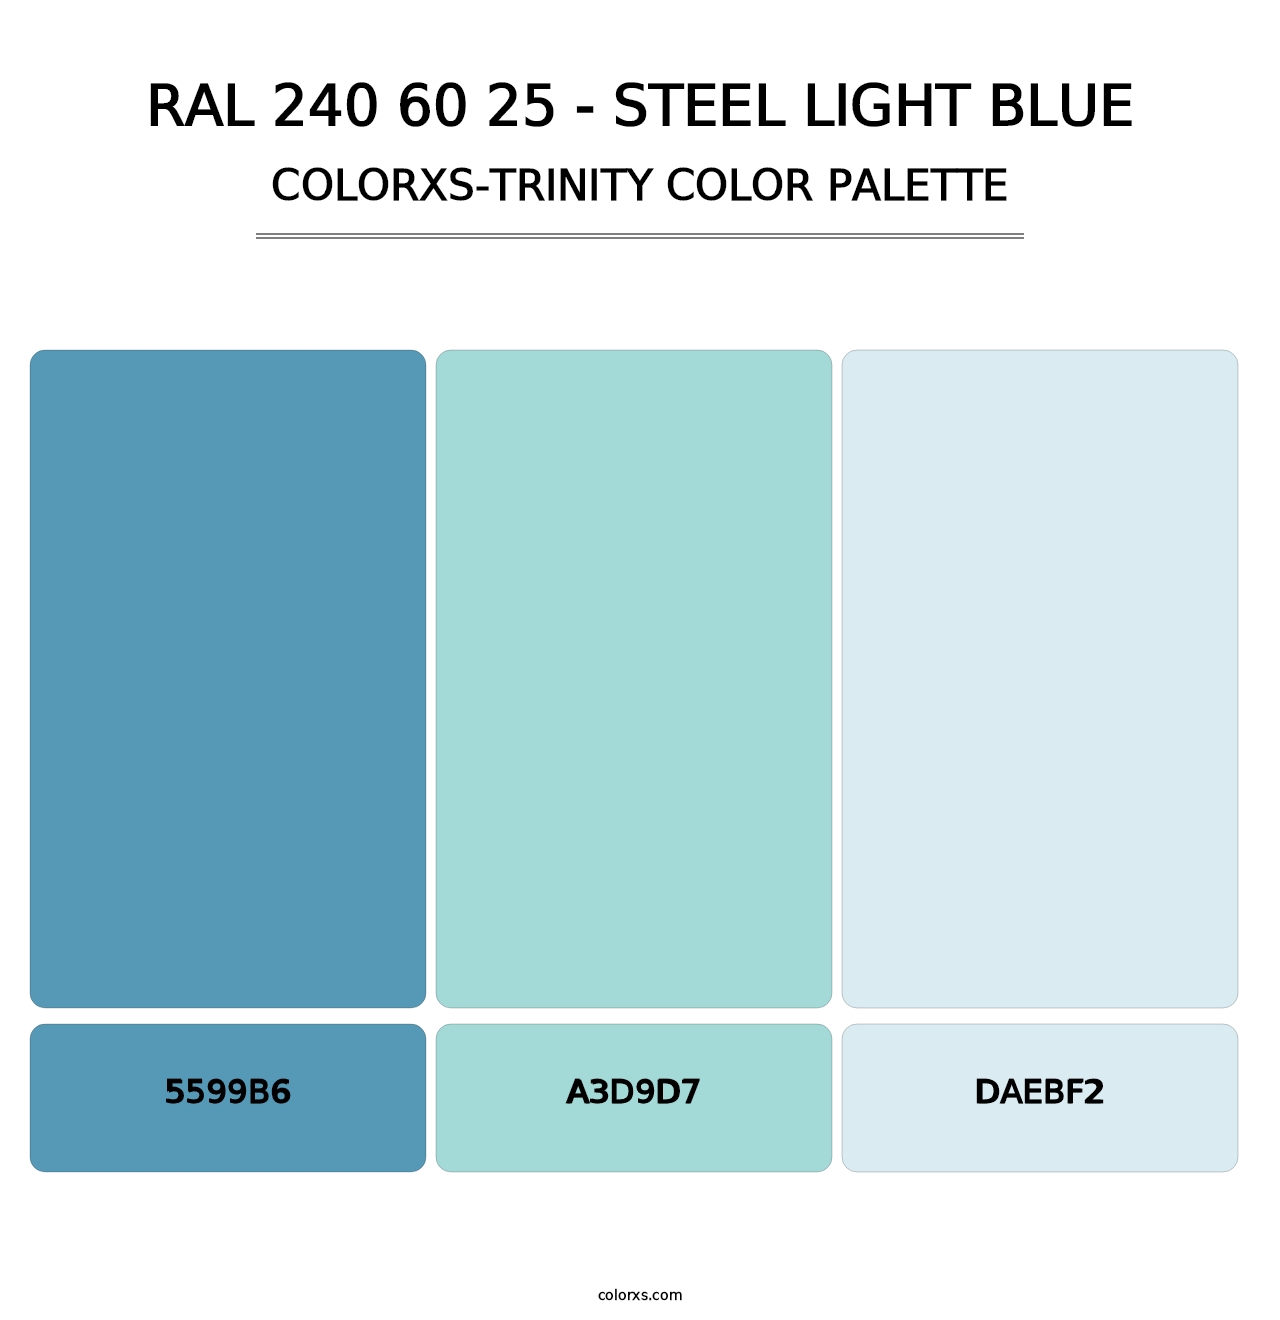 RAL 240 60 25 - Steel Light Blue - Colorxs Trinity Palette